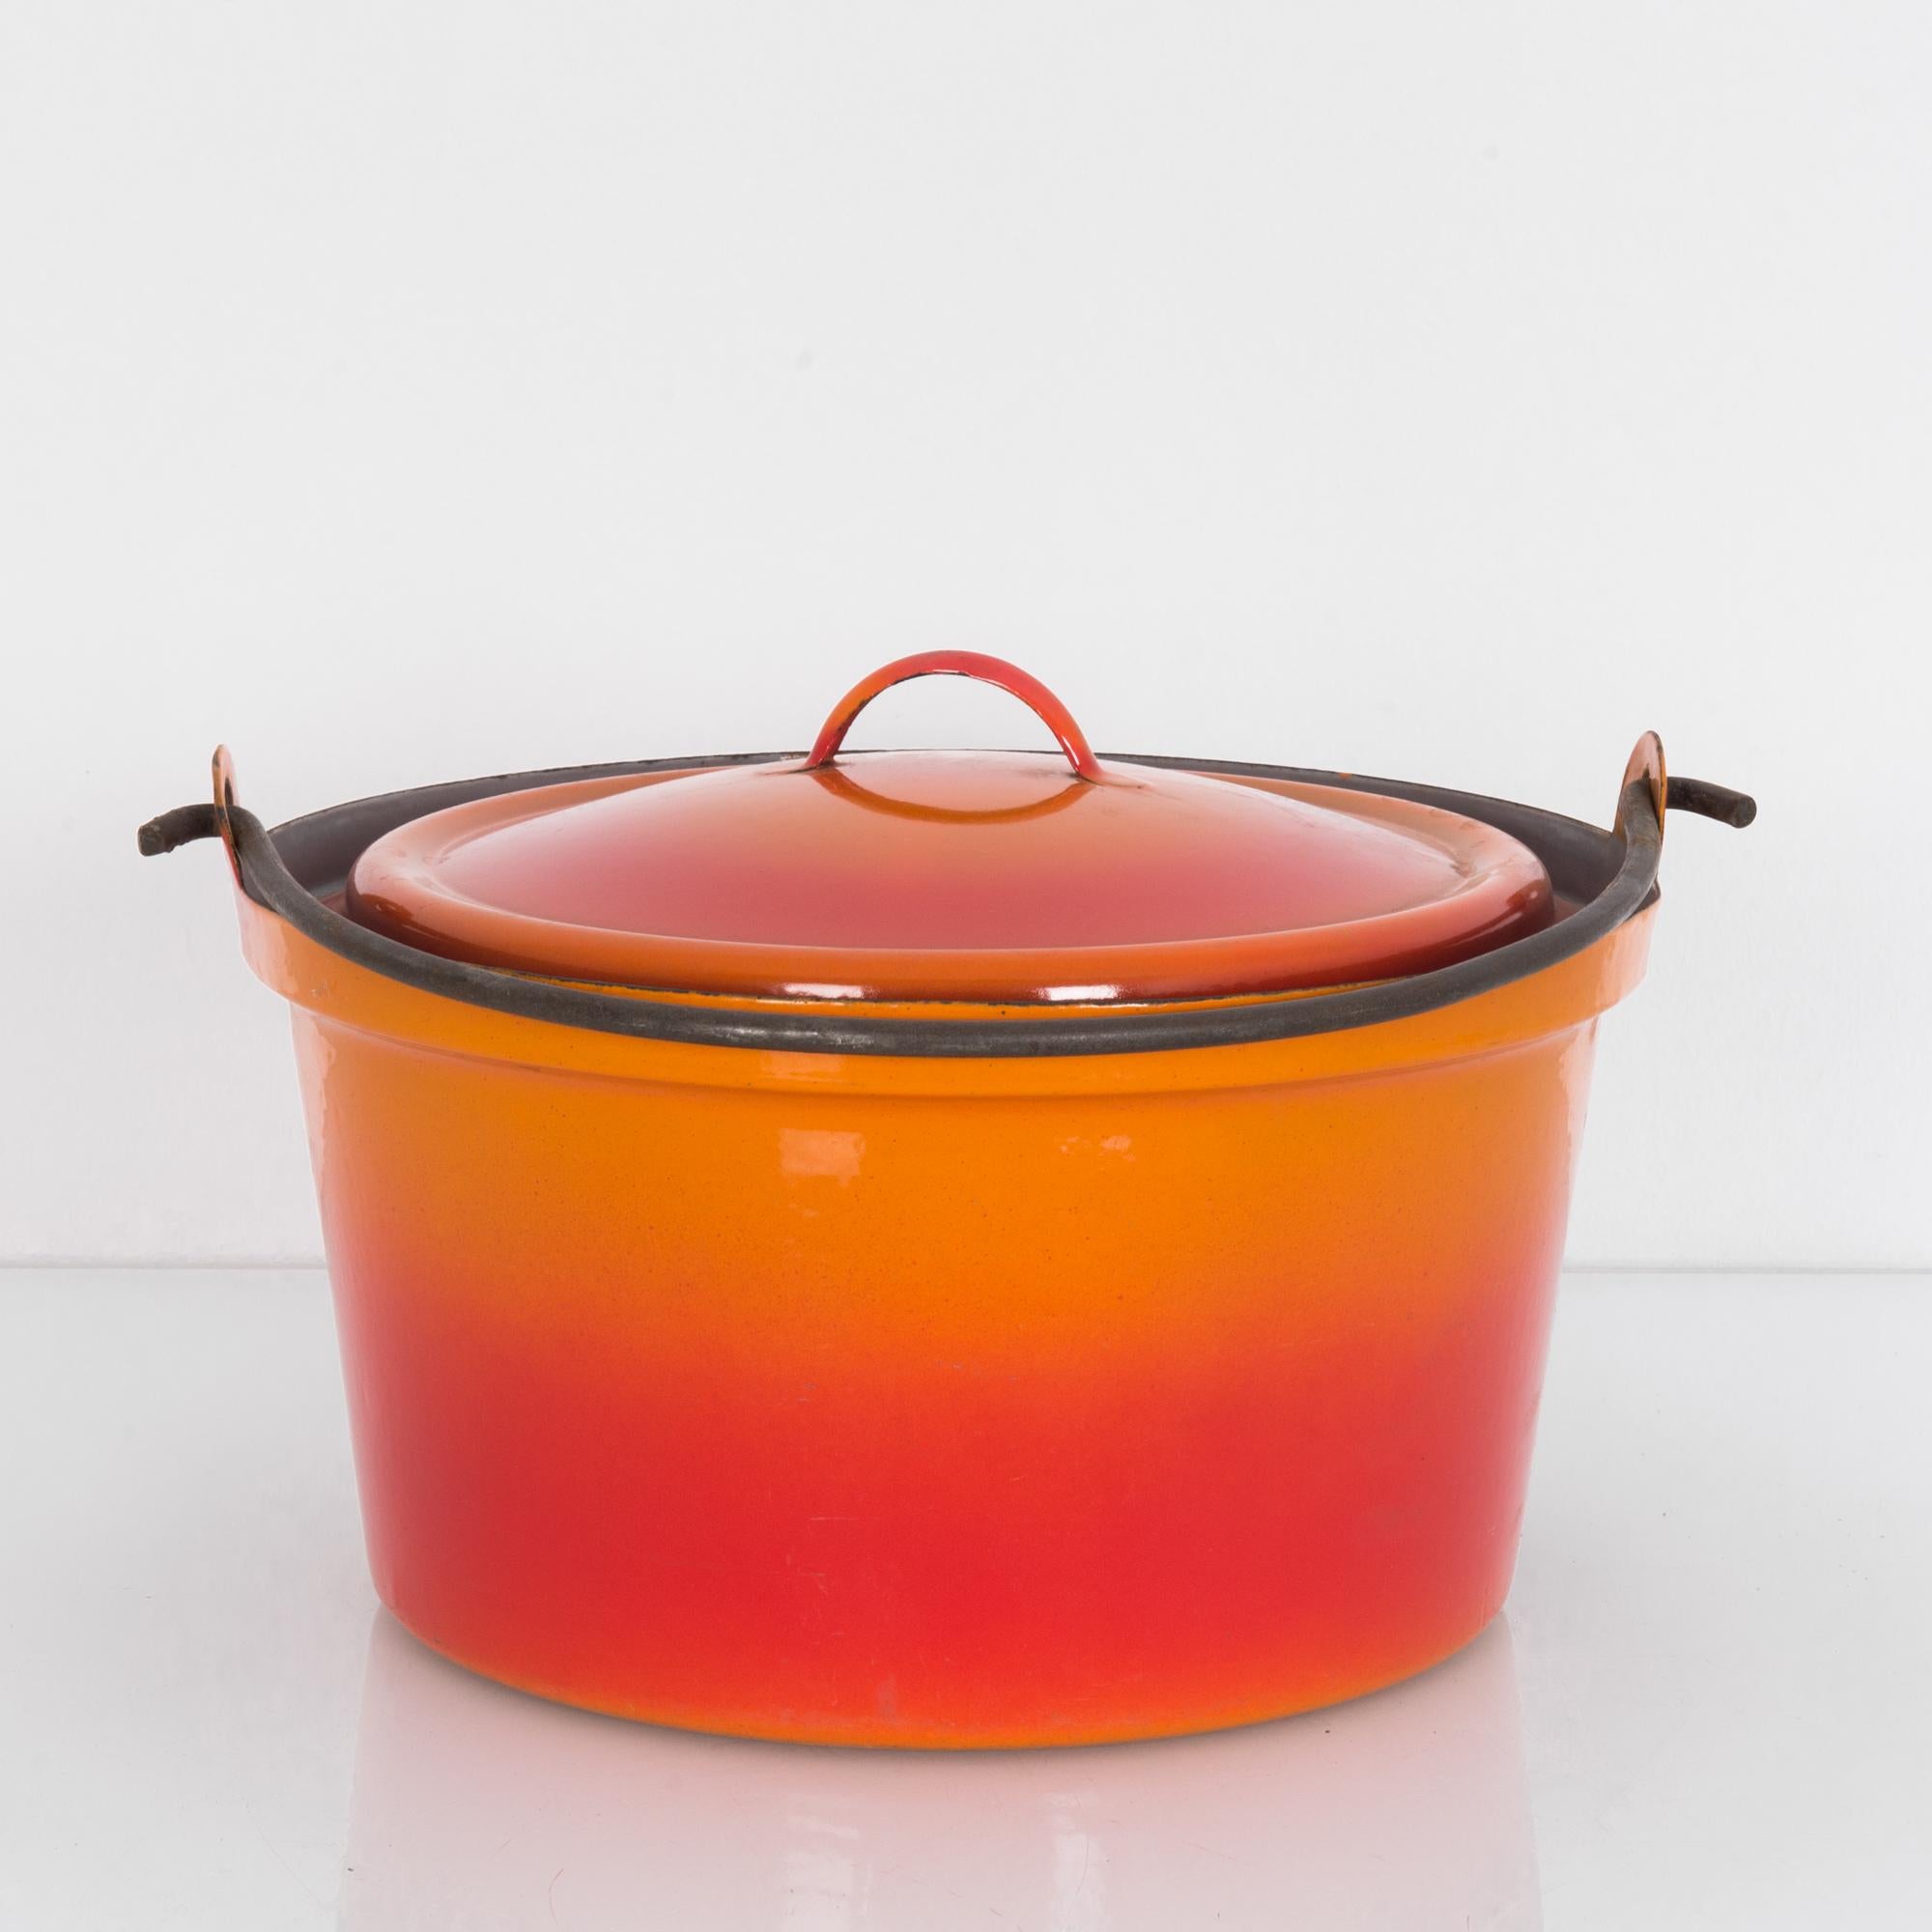 The red-orange gradient of this large enamel pot makes it a striking decorative piece for your interior space. Made in Belgium, the pot comes with a lid and a simple, black carrying handle.